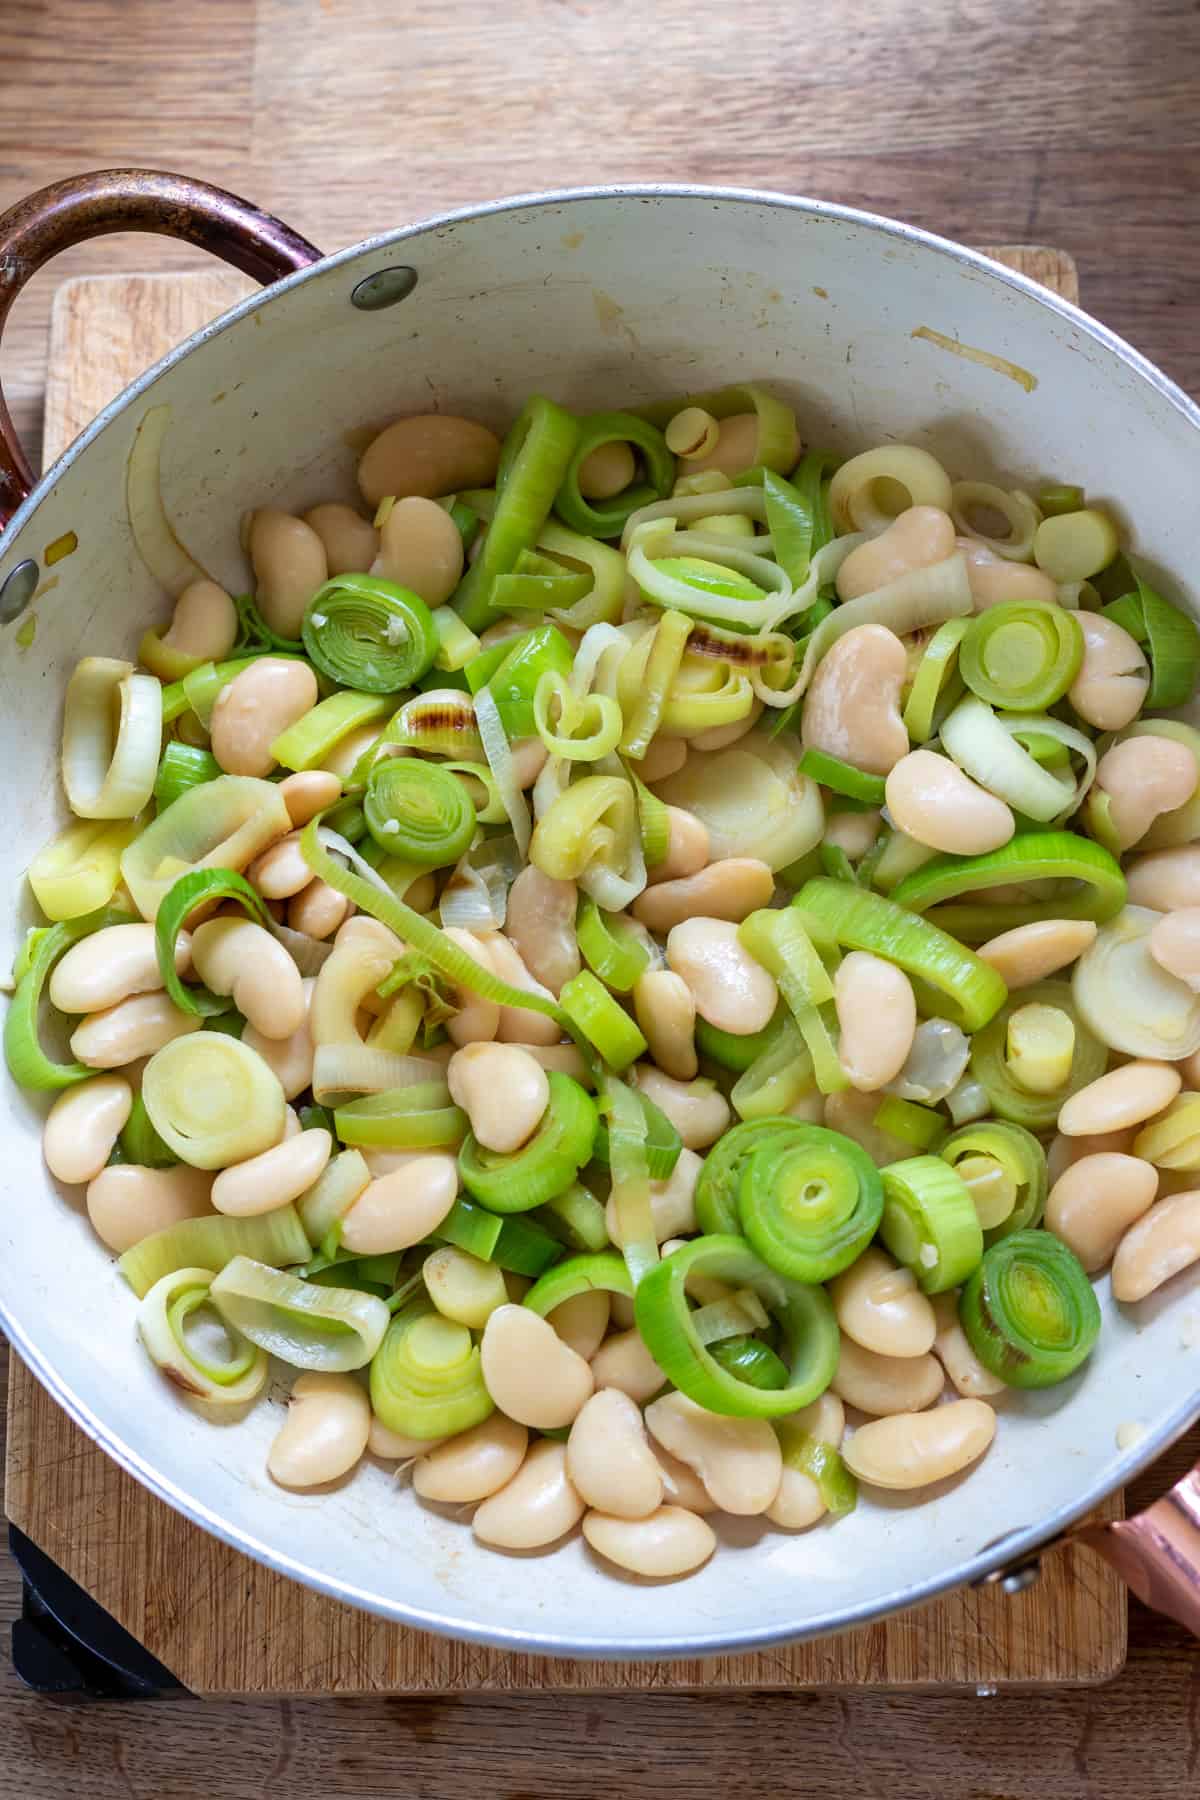 Beans tossed with cooked leeks.